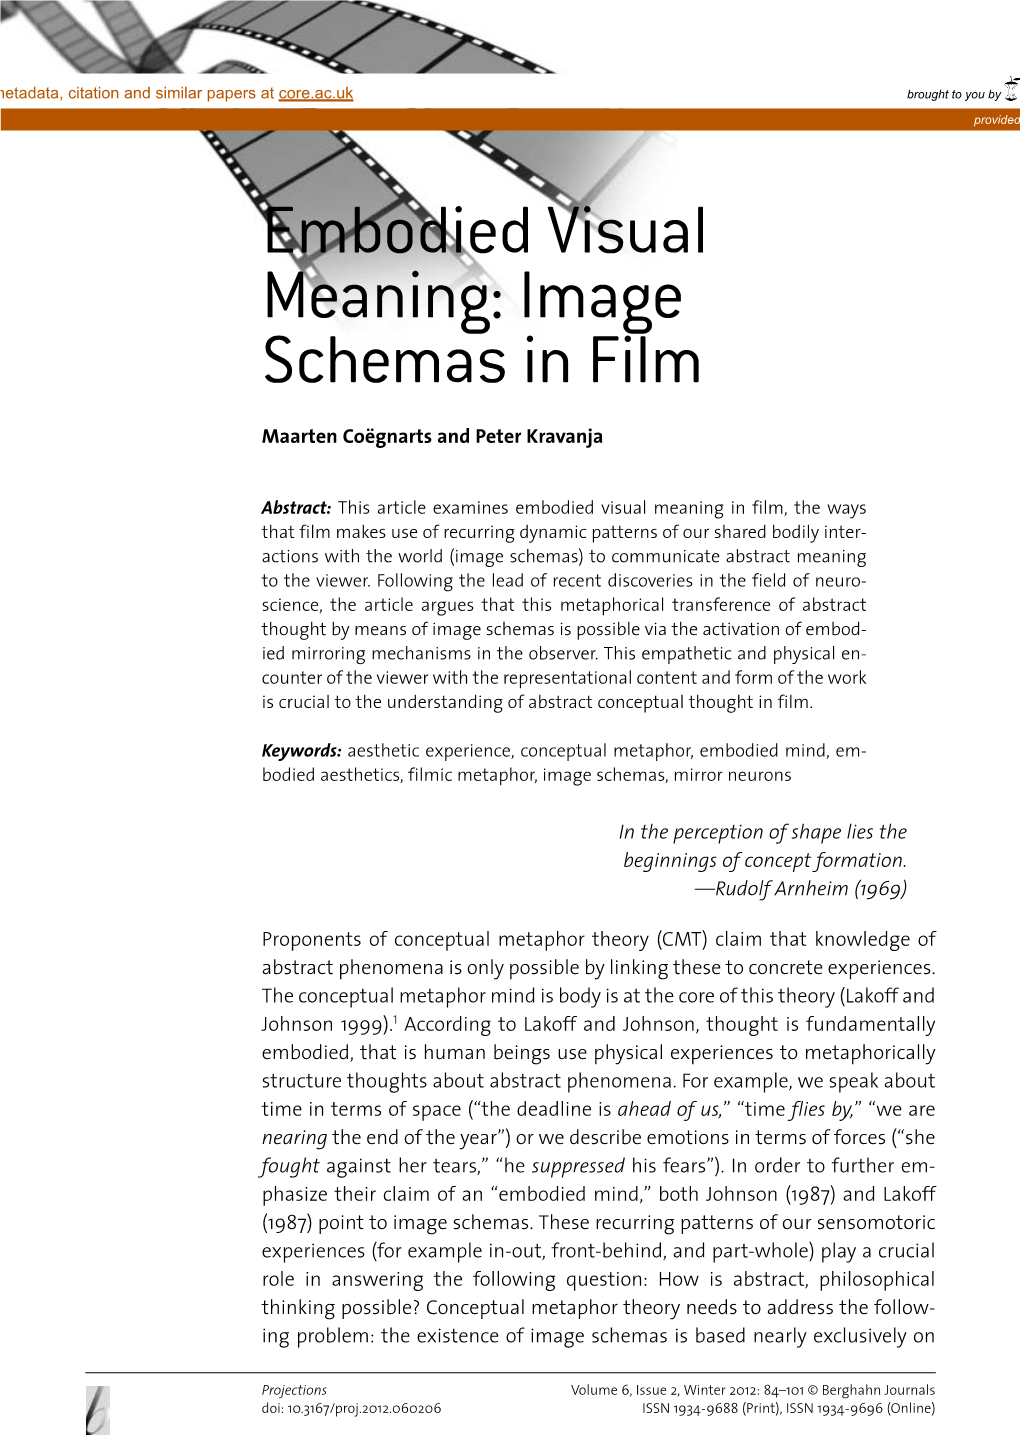 Embodied Visual Meaning: Image Schemas in Film